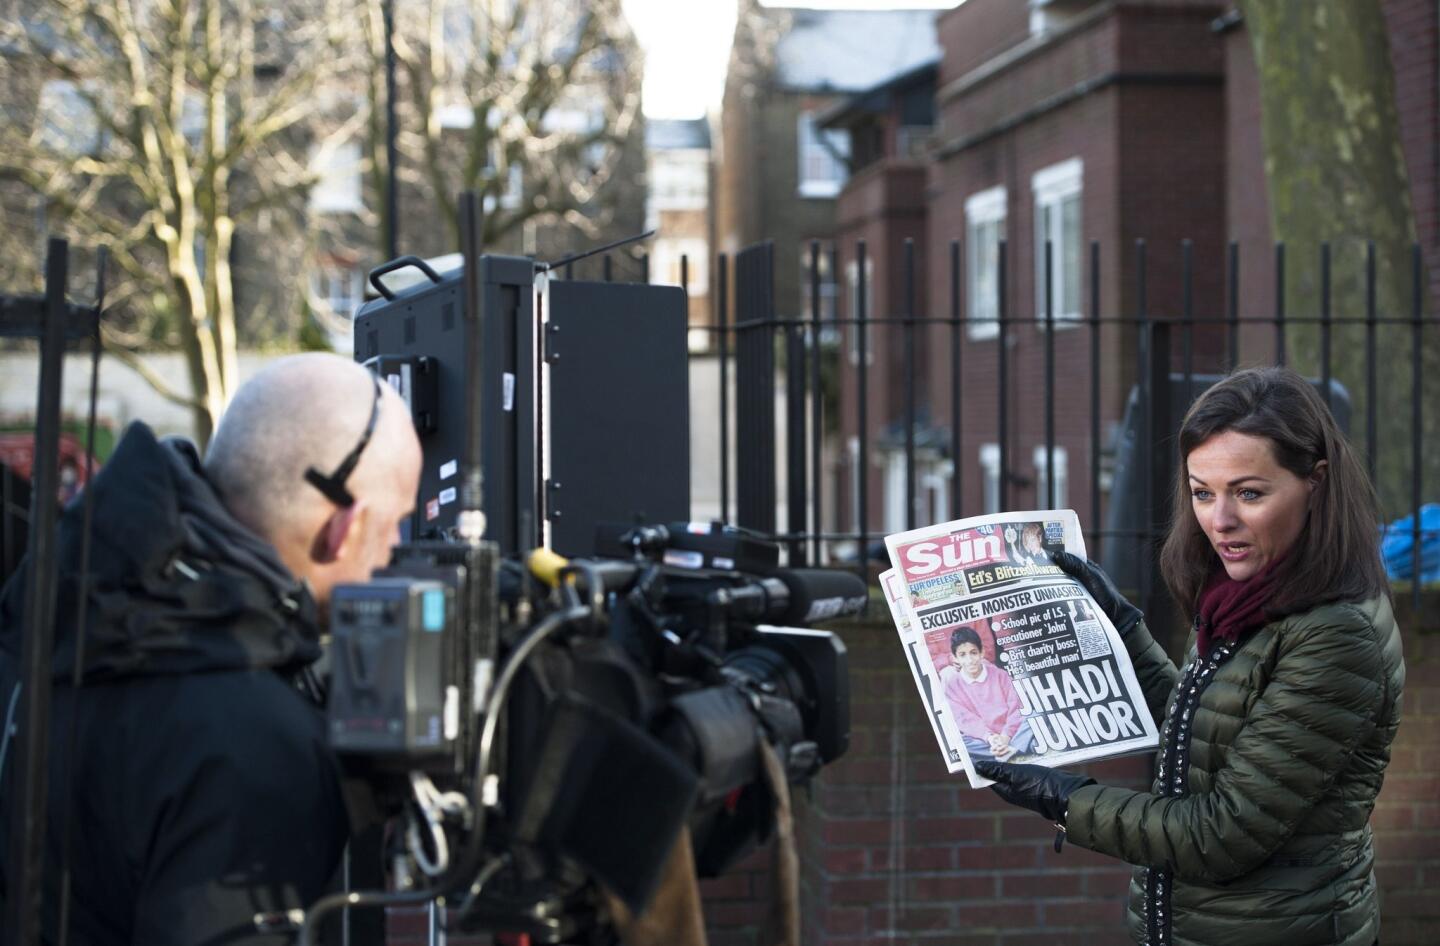 A journalist holds up a newspaper on Feb. 27 as she does a report outside a residence in London where Mohammed Emwazi, identified as the masked Islamic State militant "Jihadi John," is believed to have lived.